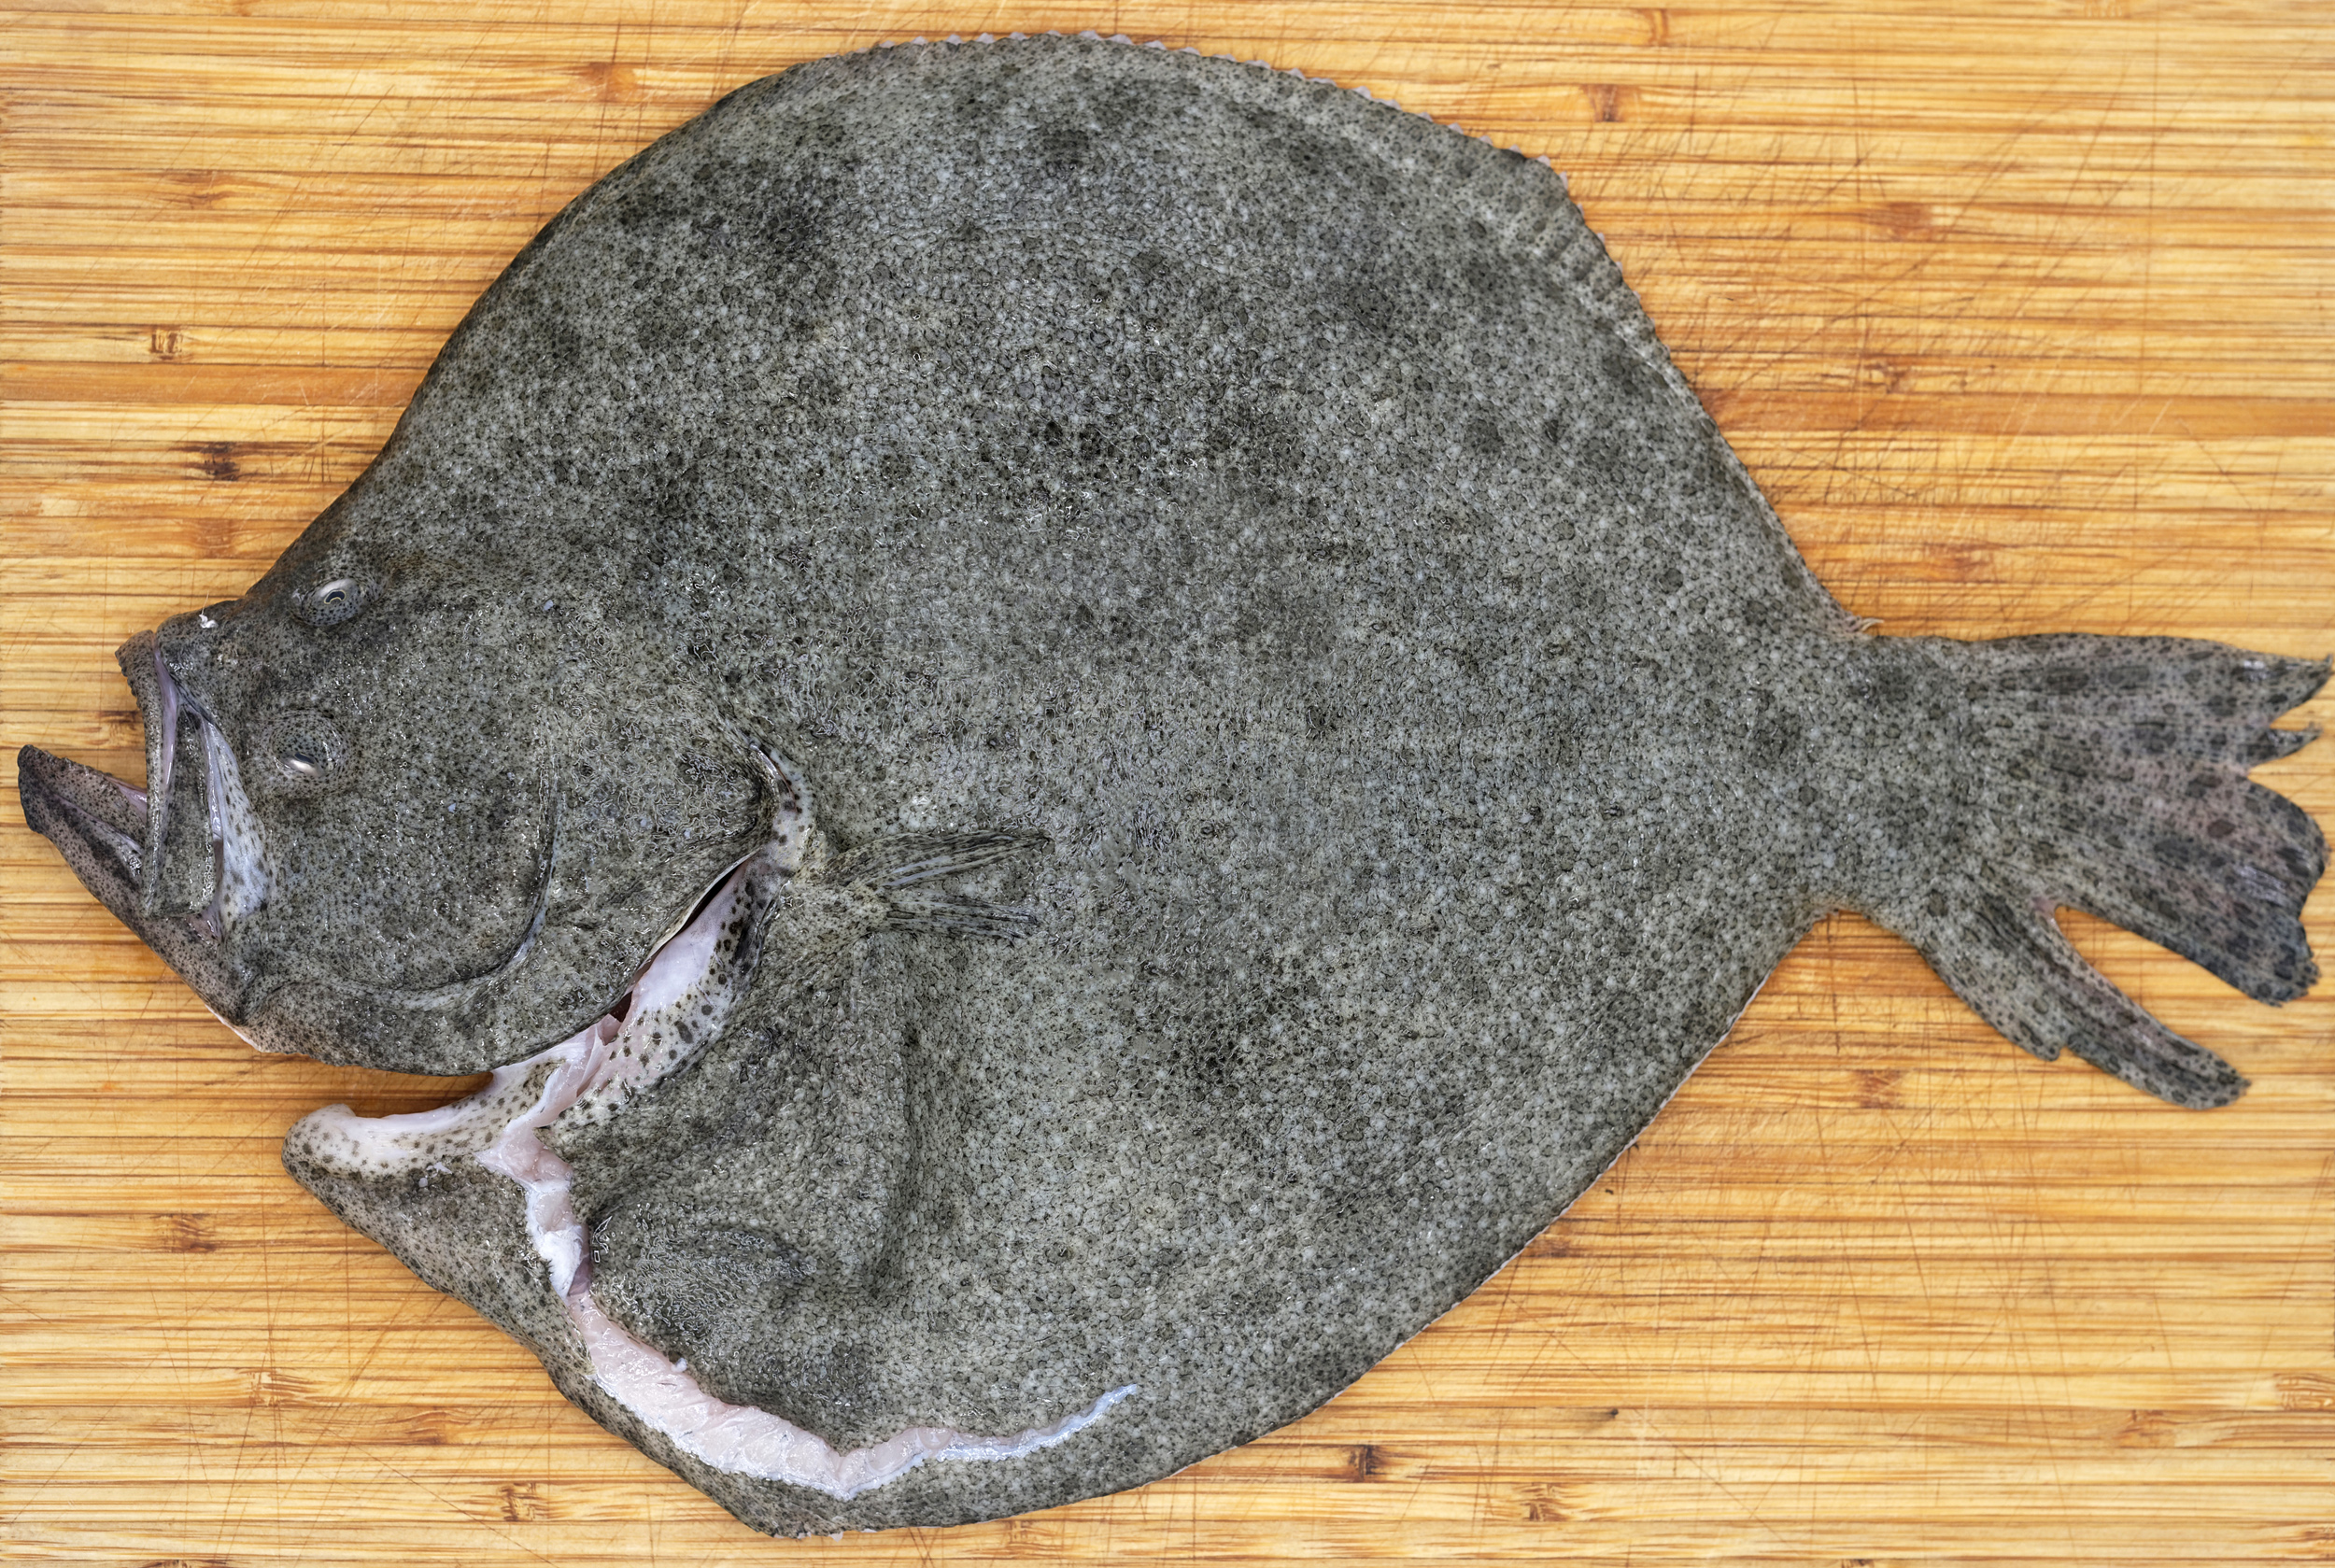 Roasted or Pan-Fried Turbot, and How to Cook Fish